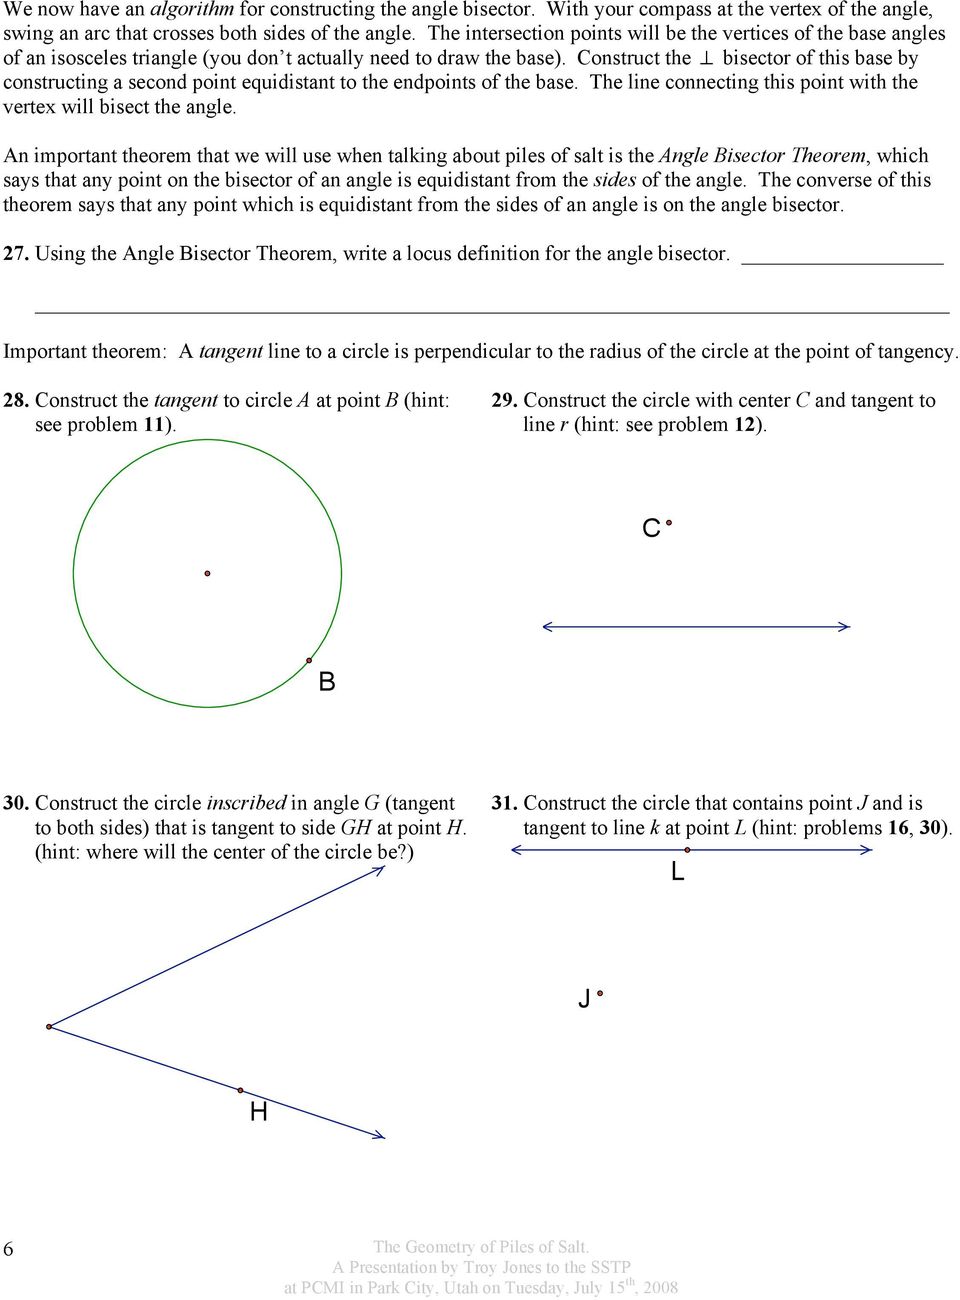 Construct the bisector of this base by constructing a second point equidistant to the endpoints of the base. The line connecting this point with the vertex will bisect the angle.